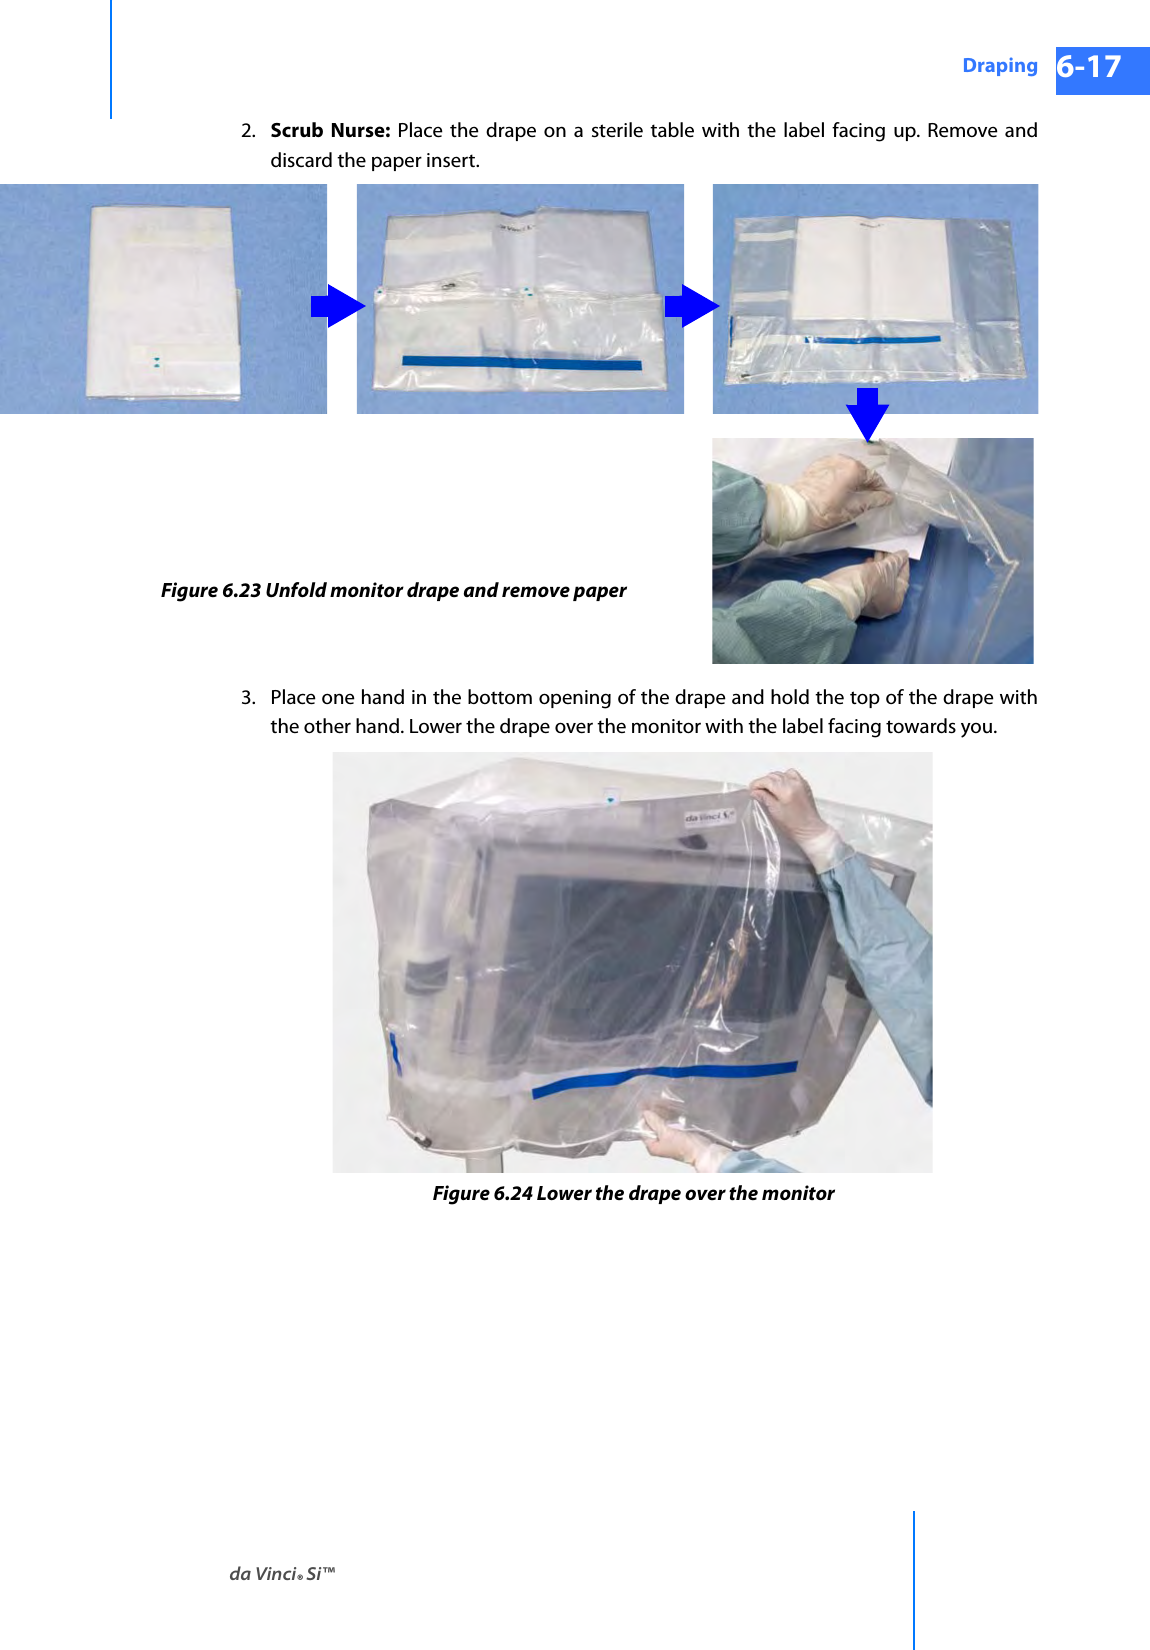 da Vinci® Si™Draping 6-17DRAFT/PRE-RELEASE/CONFIDENTIAL 10/9/142. Scrub Nurse: Place the drape on a sterile table with the label facing up. Remove and discard the paper insert.3. Place one hand in the bottom opening of the drape and hold the top of the drape with the other hand. Lower the drape over the monitor with the label facing towards you.Figure 6.24 Lower the drape over the monitorFigure 6.23 Unfold monitor drape and remove paper